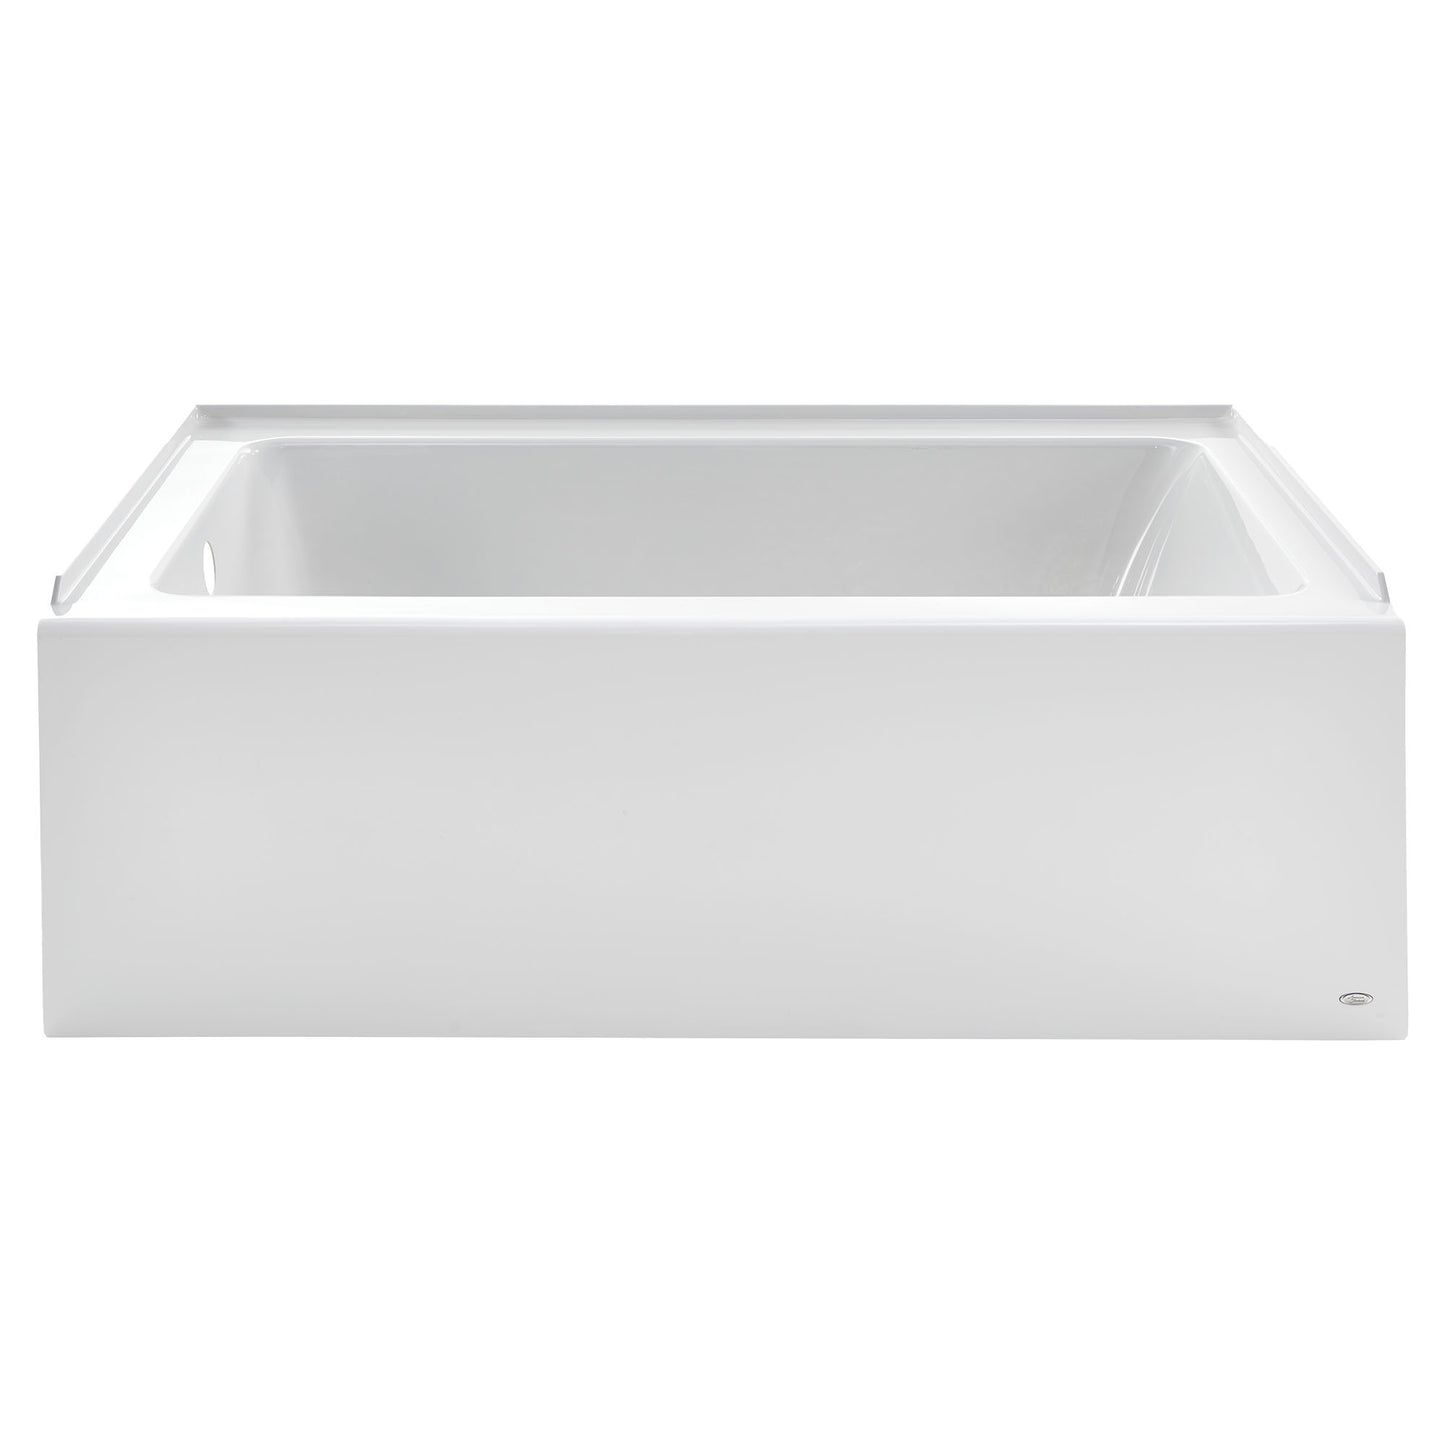 AMERICAN-STANDARD 2946202.020, Studio 60 x 32-Inch Integral Apron Bathtub With Left-Hand Outlet in White